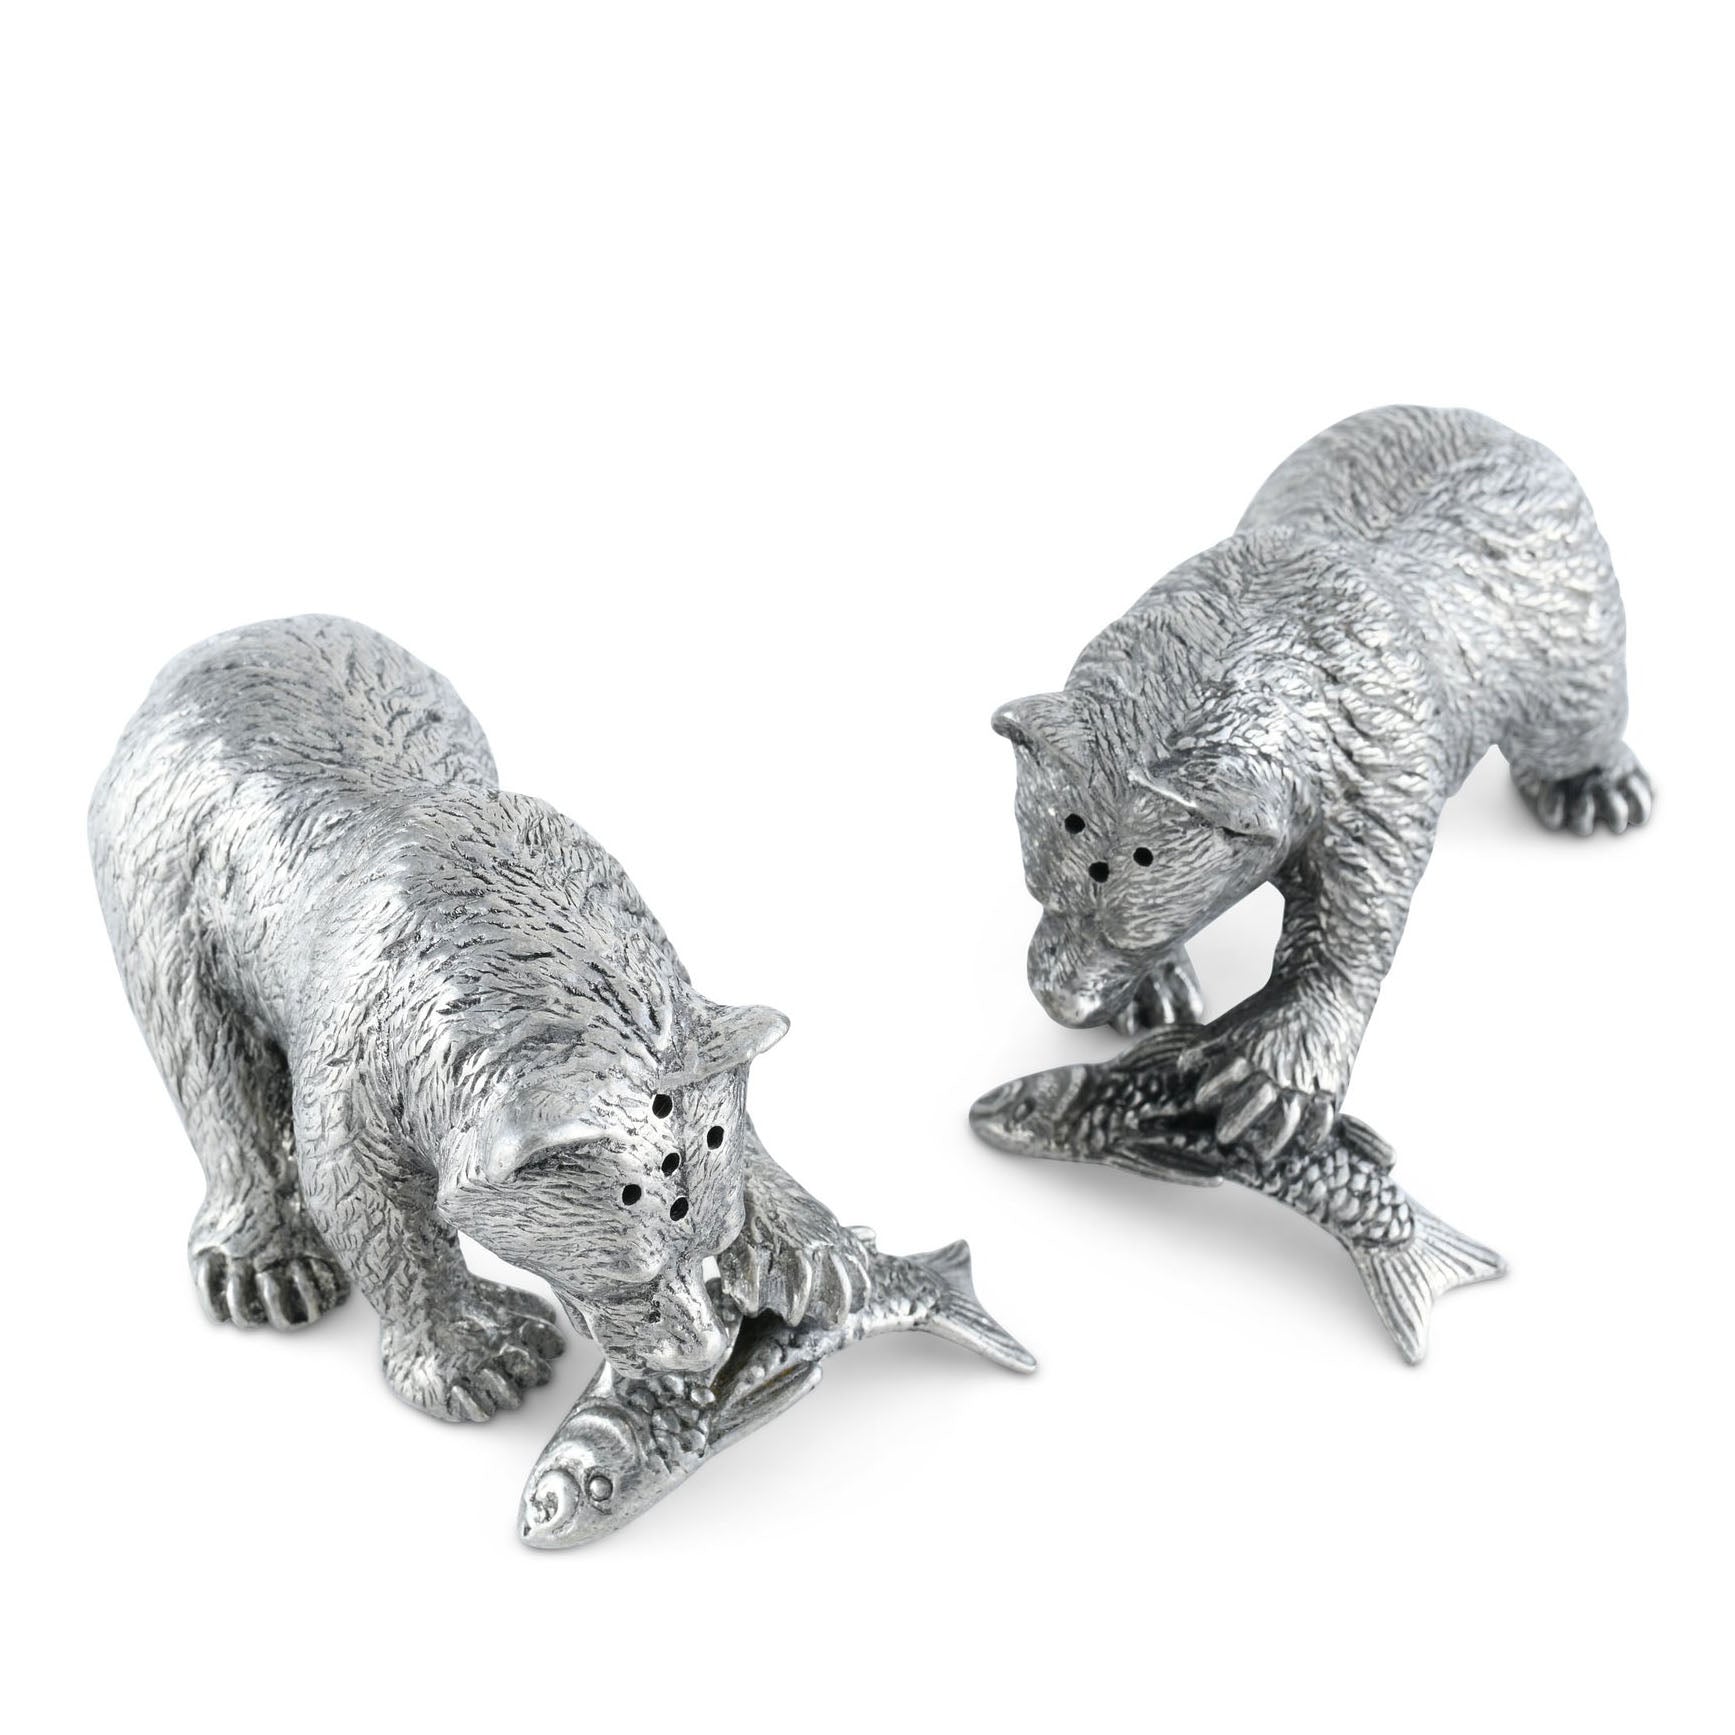 Pewter Fishing Bear Salt and Pepper Shakers